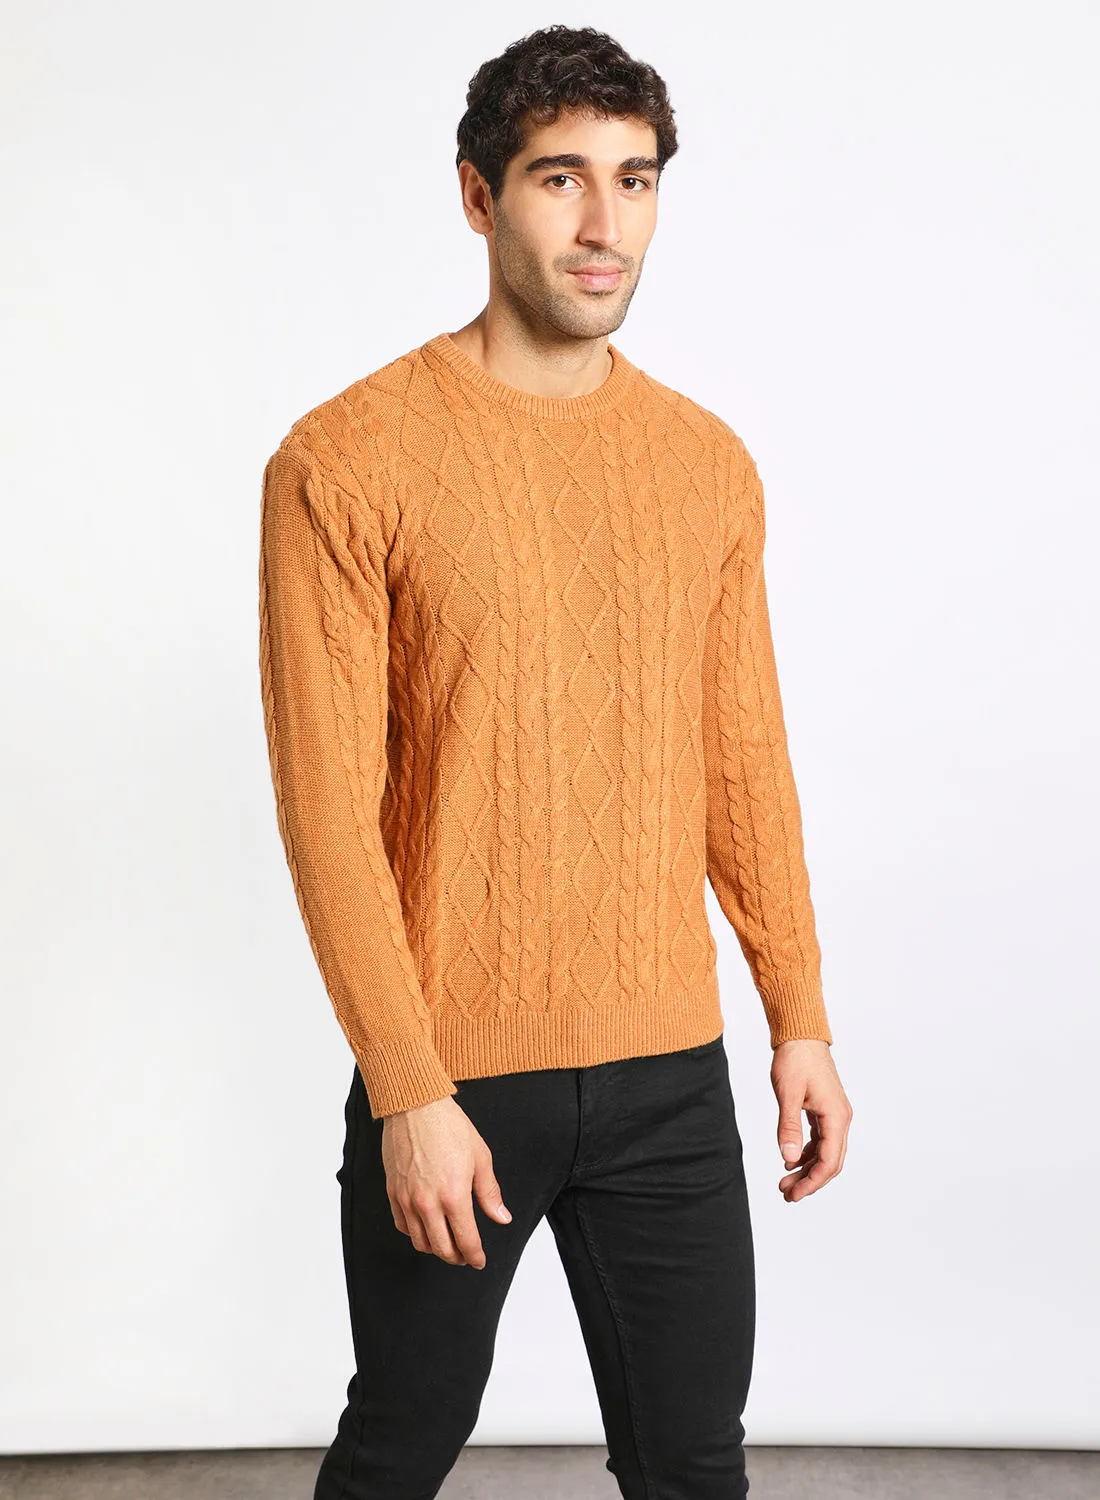 Noon East Men's Solid Plain Knitted Patterned Full Sleeves Sweater For Winters , Round Neck Full Sleeves Orange